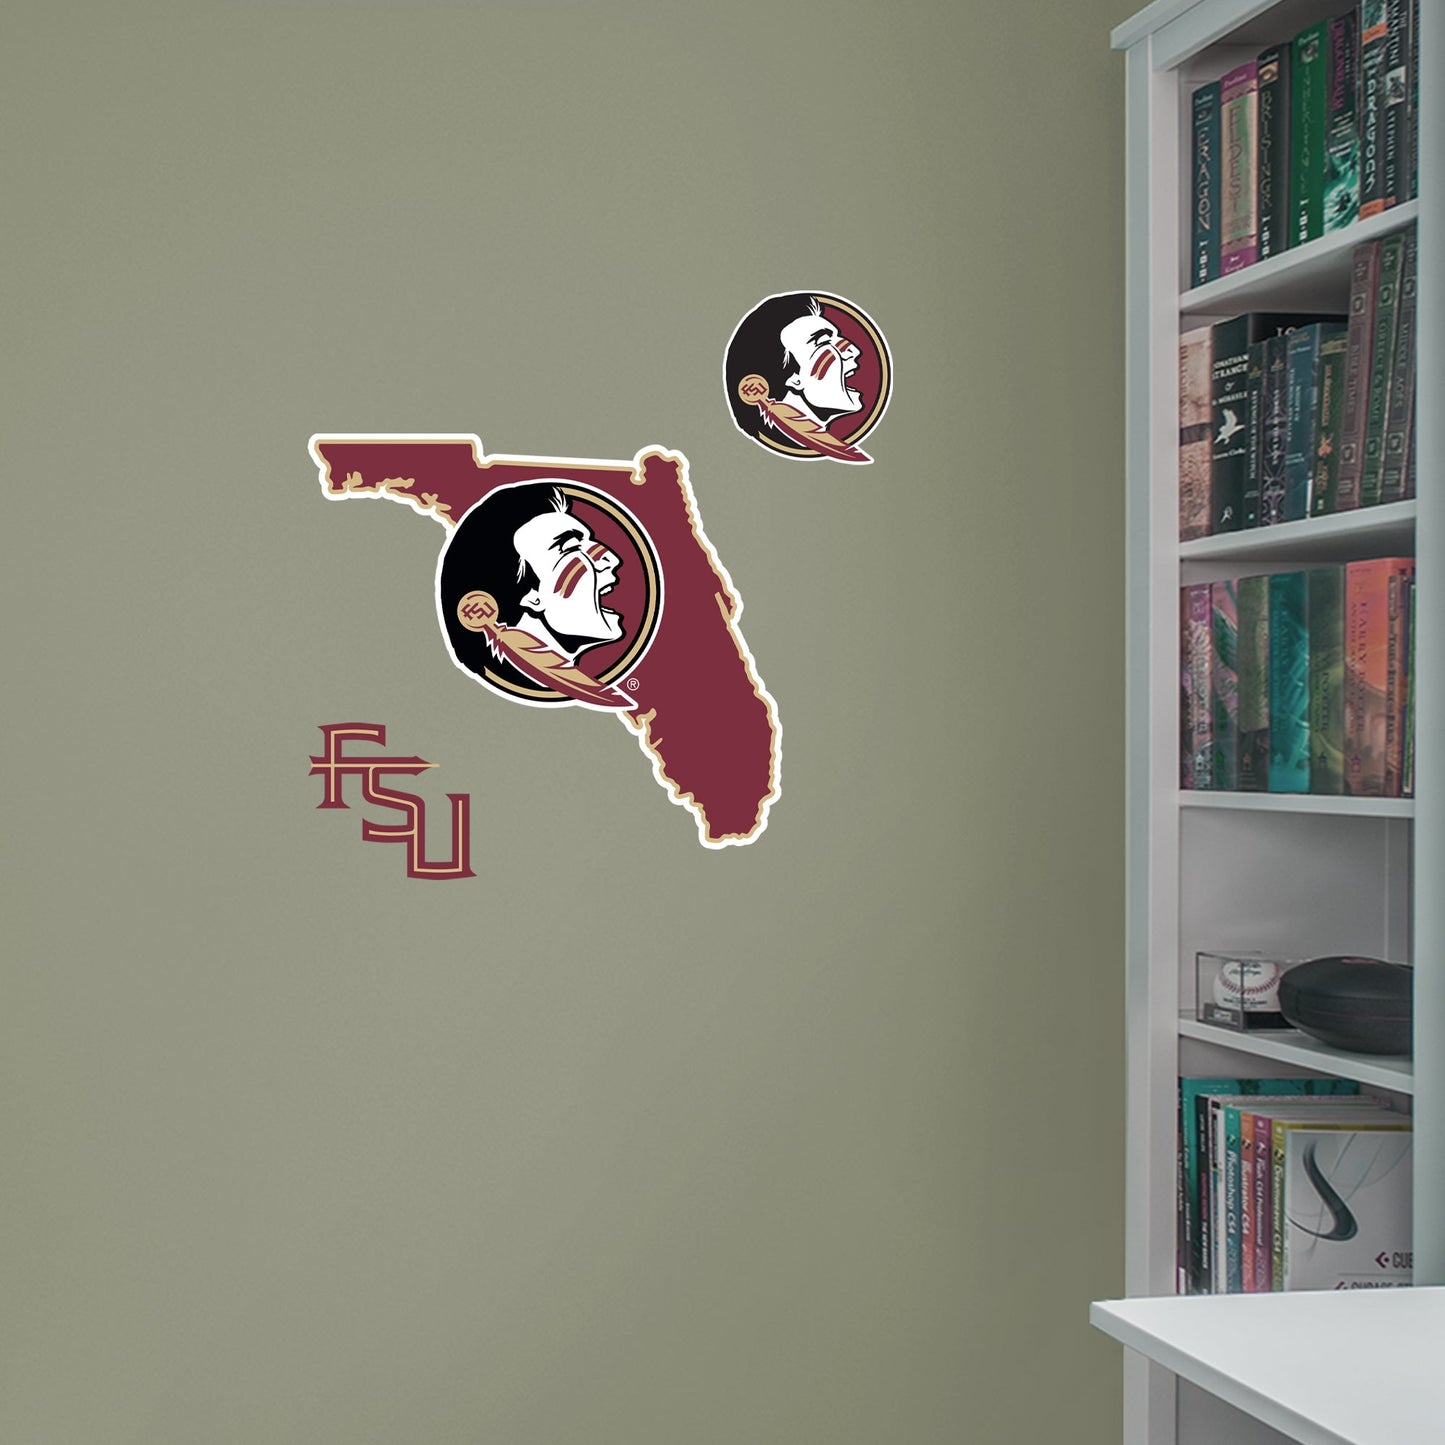 Florida State Seminoles: State of Florida Logo - Officially Licensed NCAA Removable Adhesive Decal